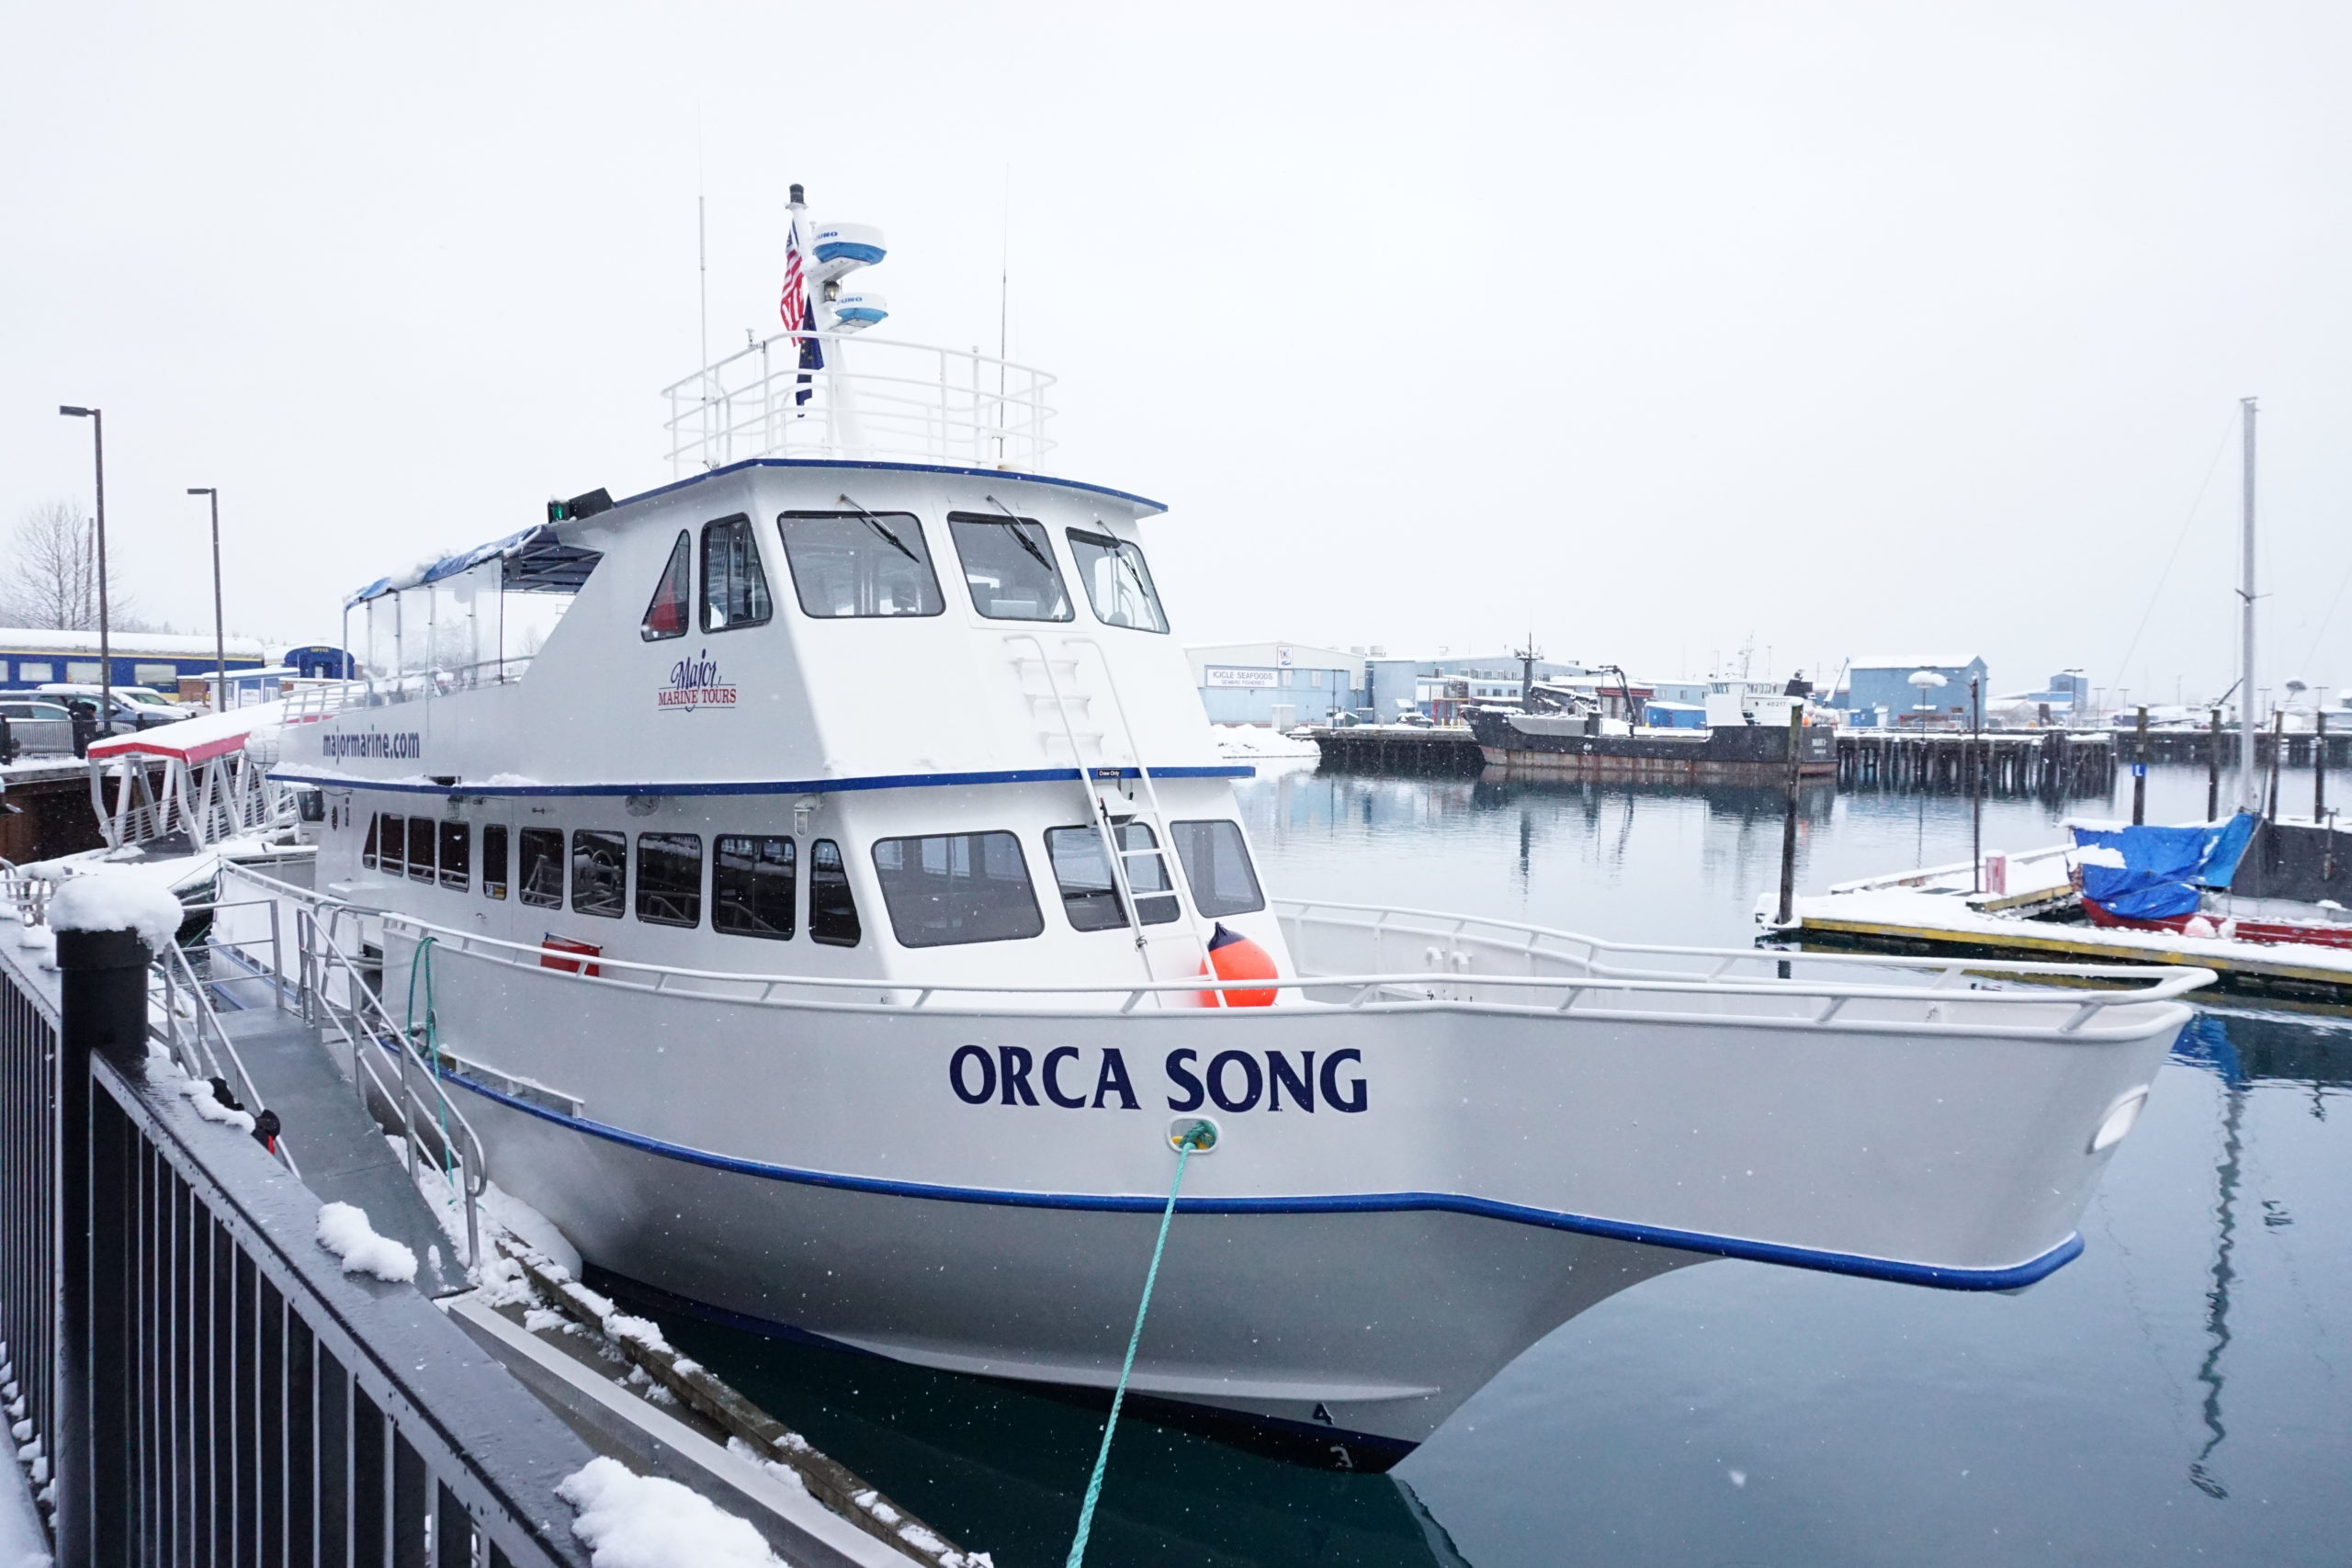 Orca Song docked in spring